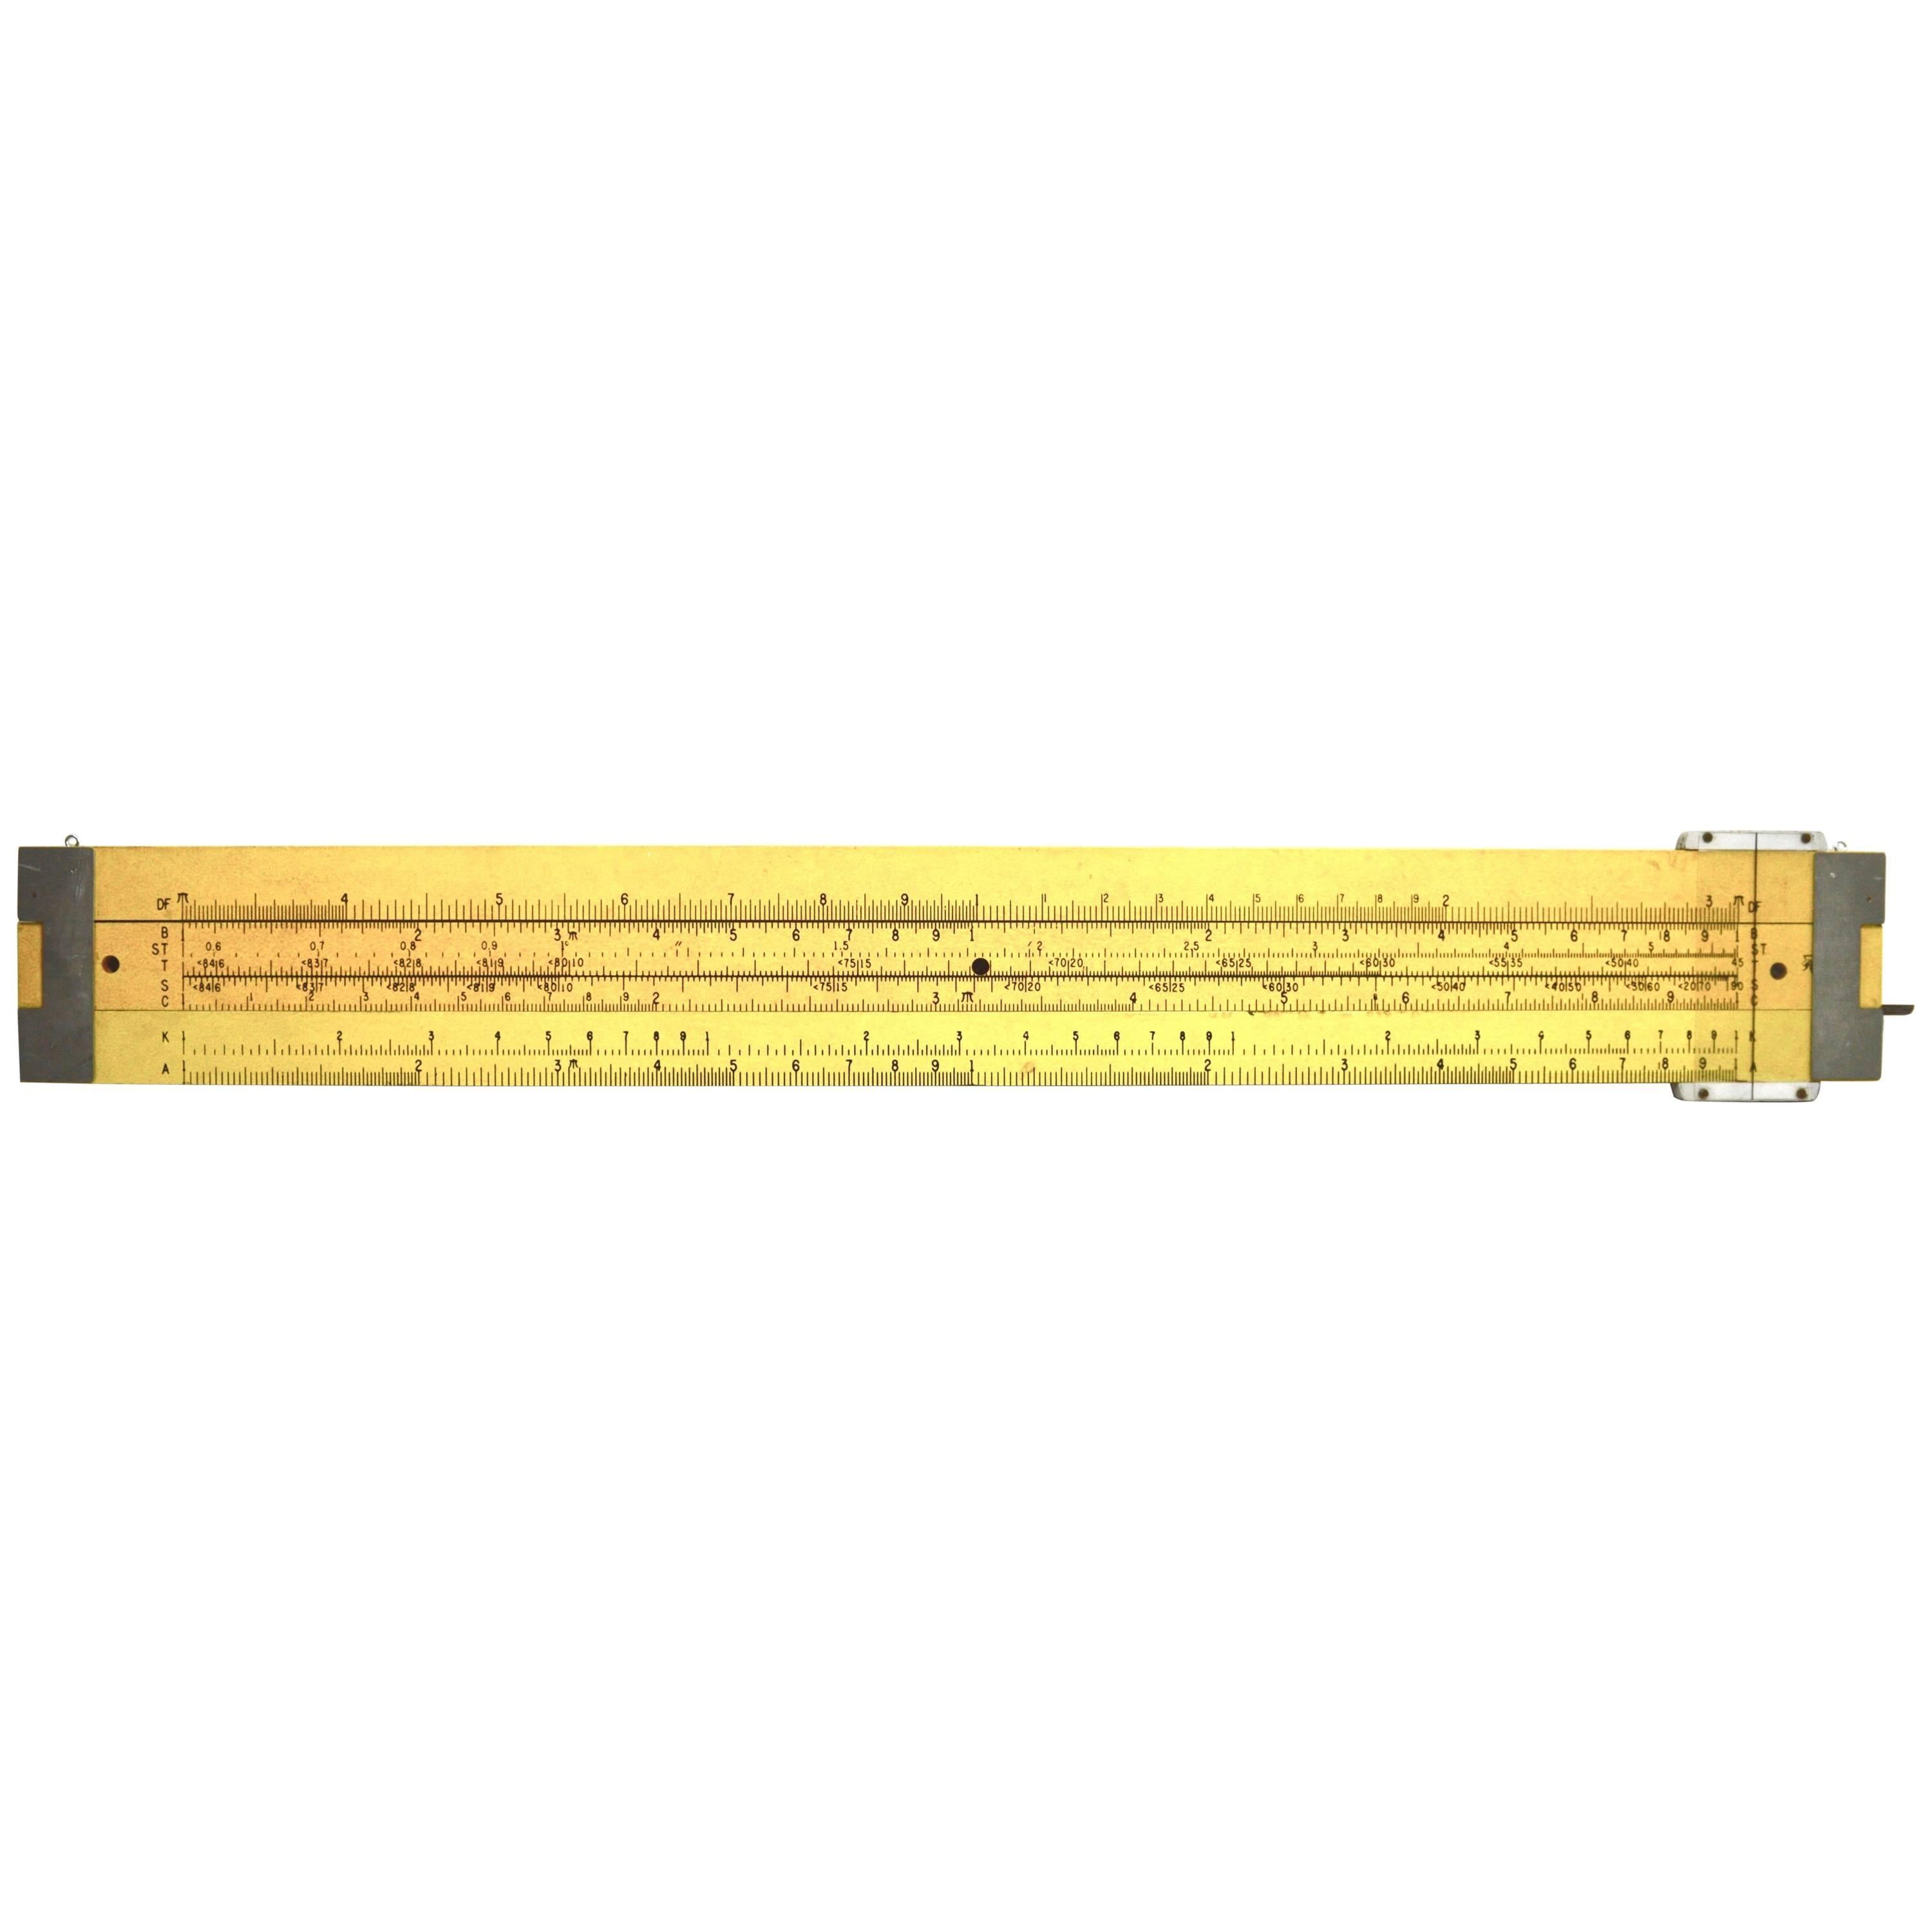 Large Slide Ruler by Pickett for Display or Teaching Aid